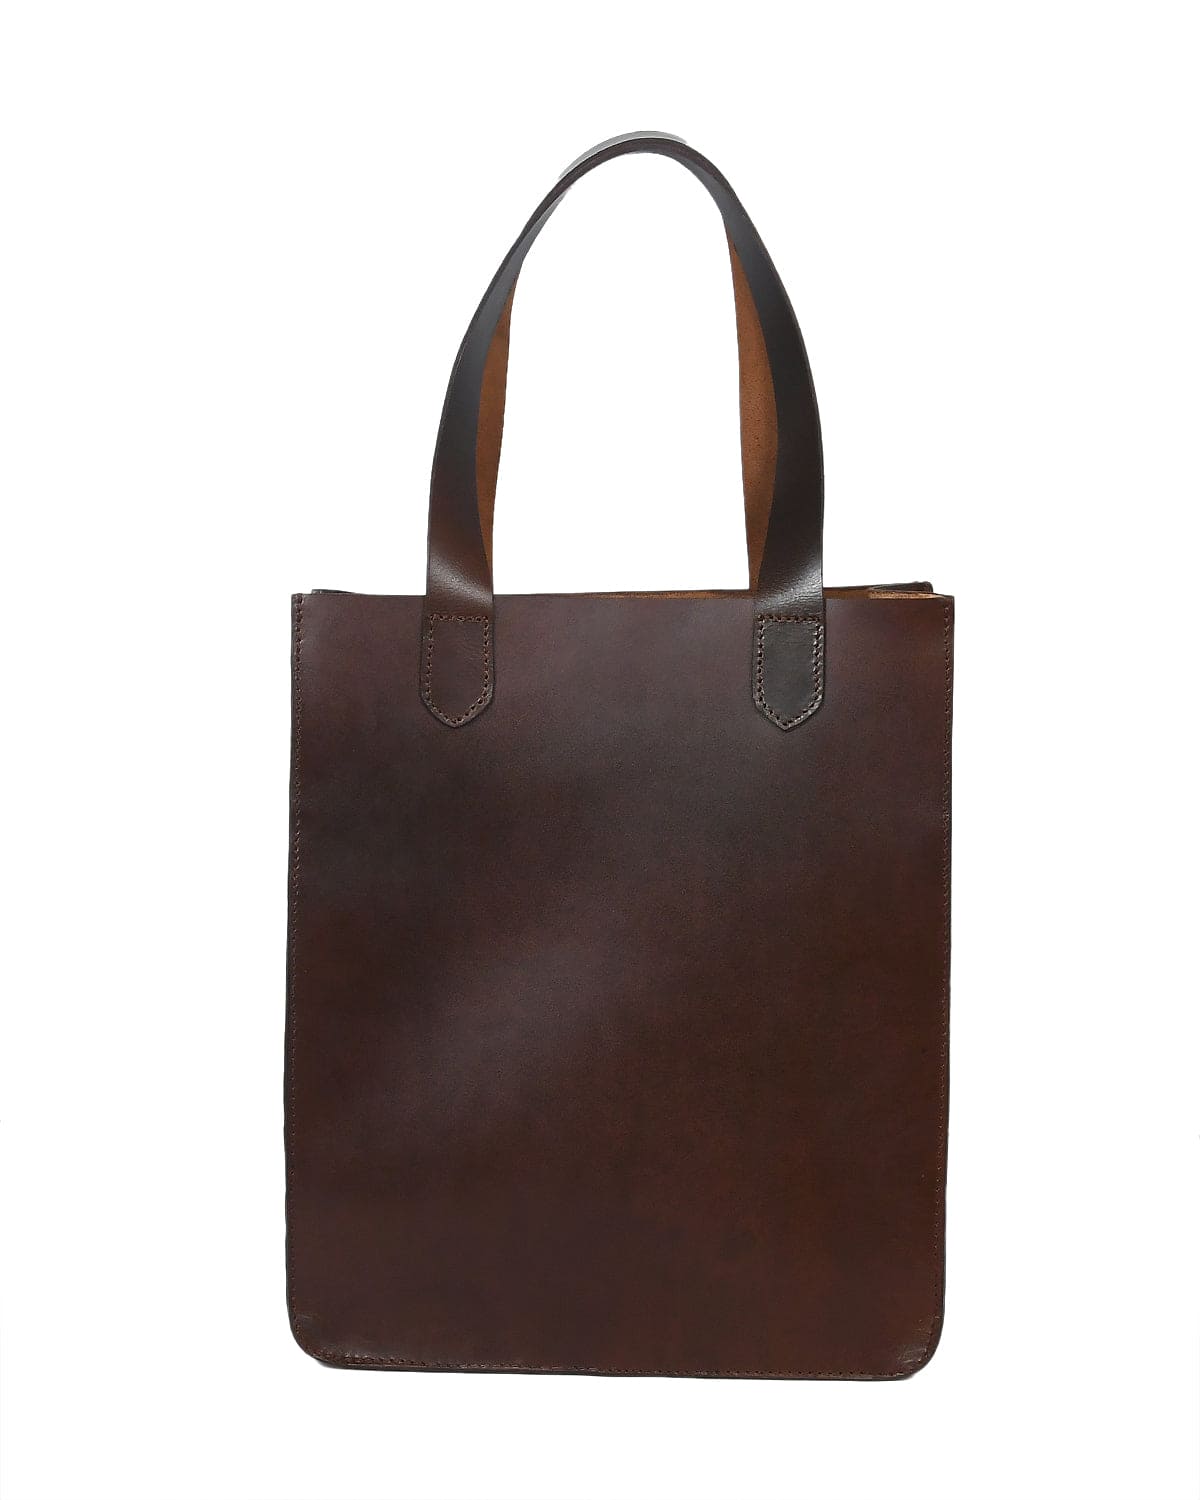 Elegance Redefined: Brown Leather Shopper Bag - Your Stylish Companion. - CELTICINDIA